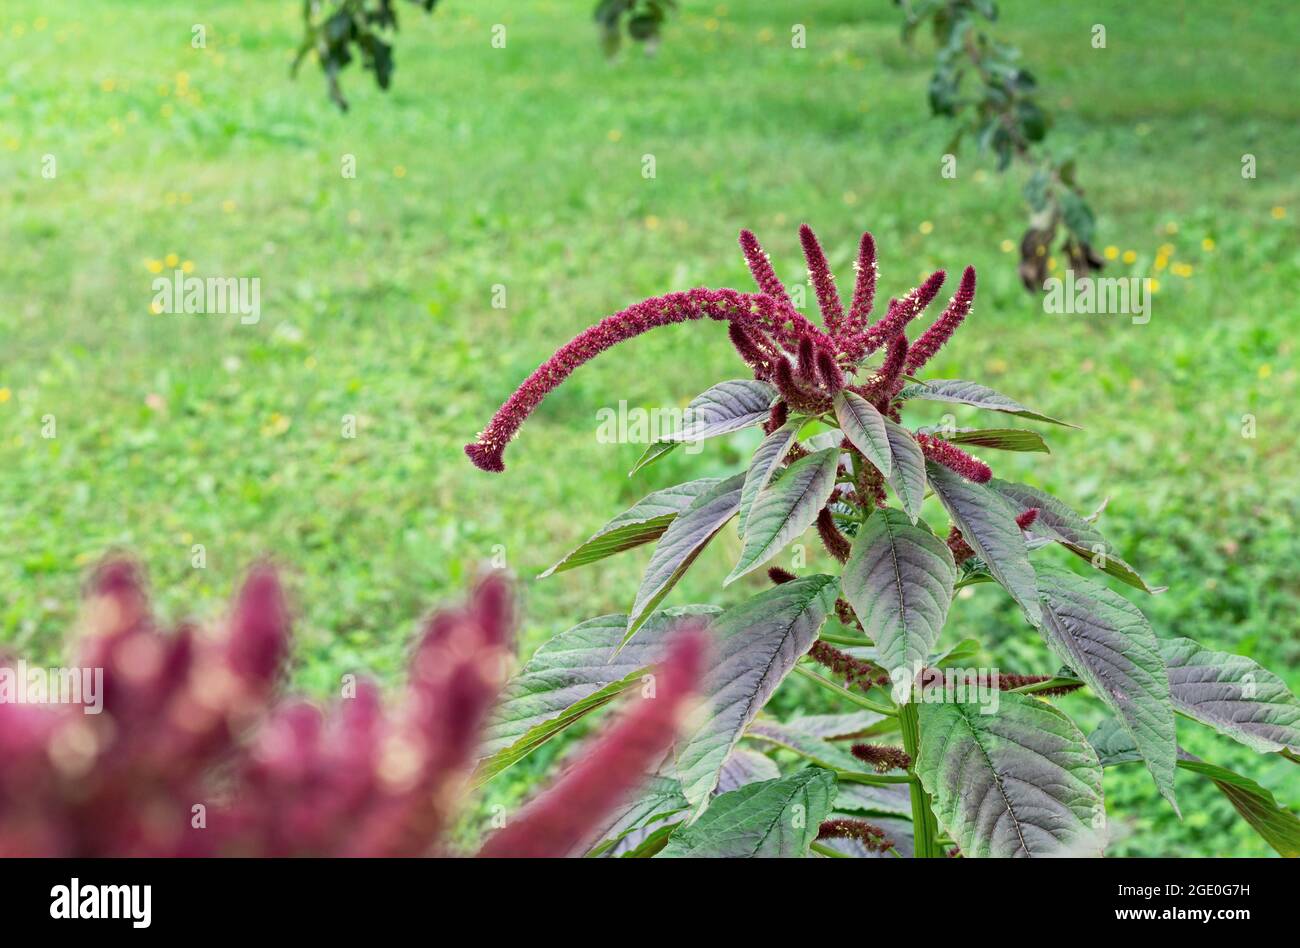 Burgundy amaranth or Aztec wheat, Inca bread, medicinal plant and cereal. Stock Photo